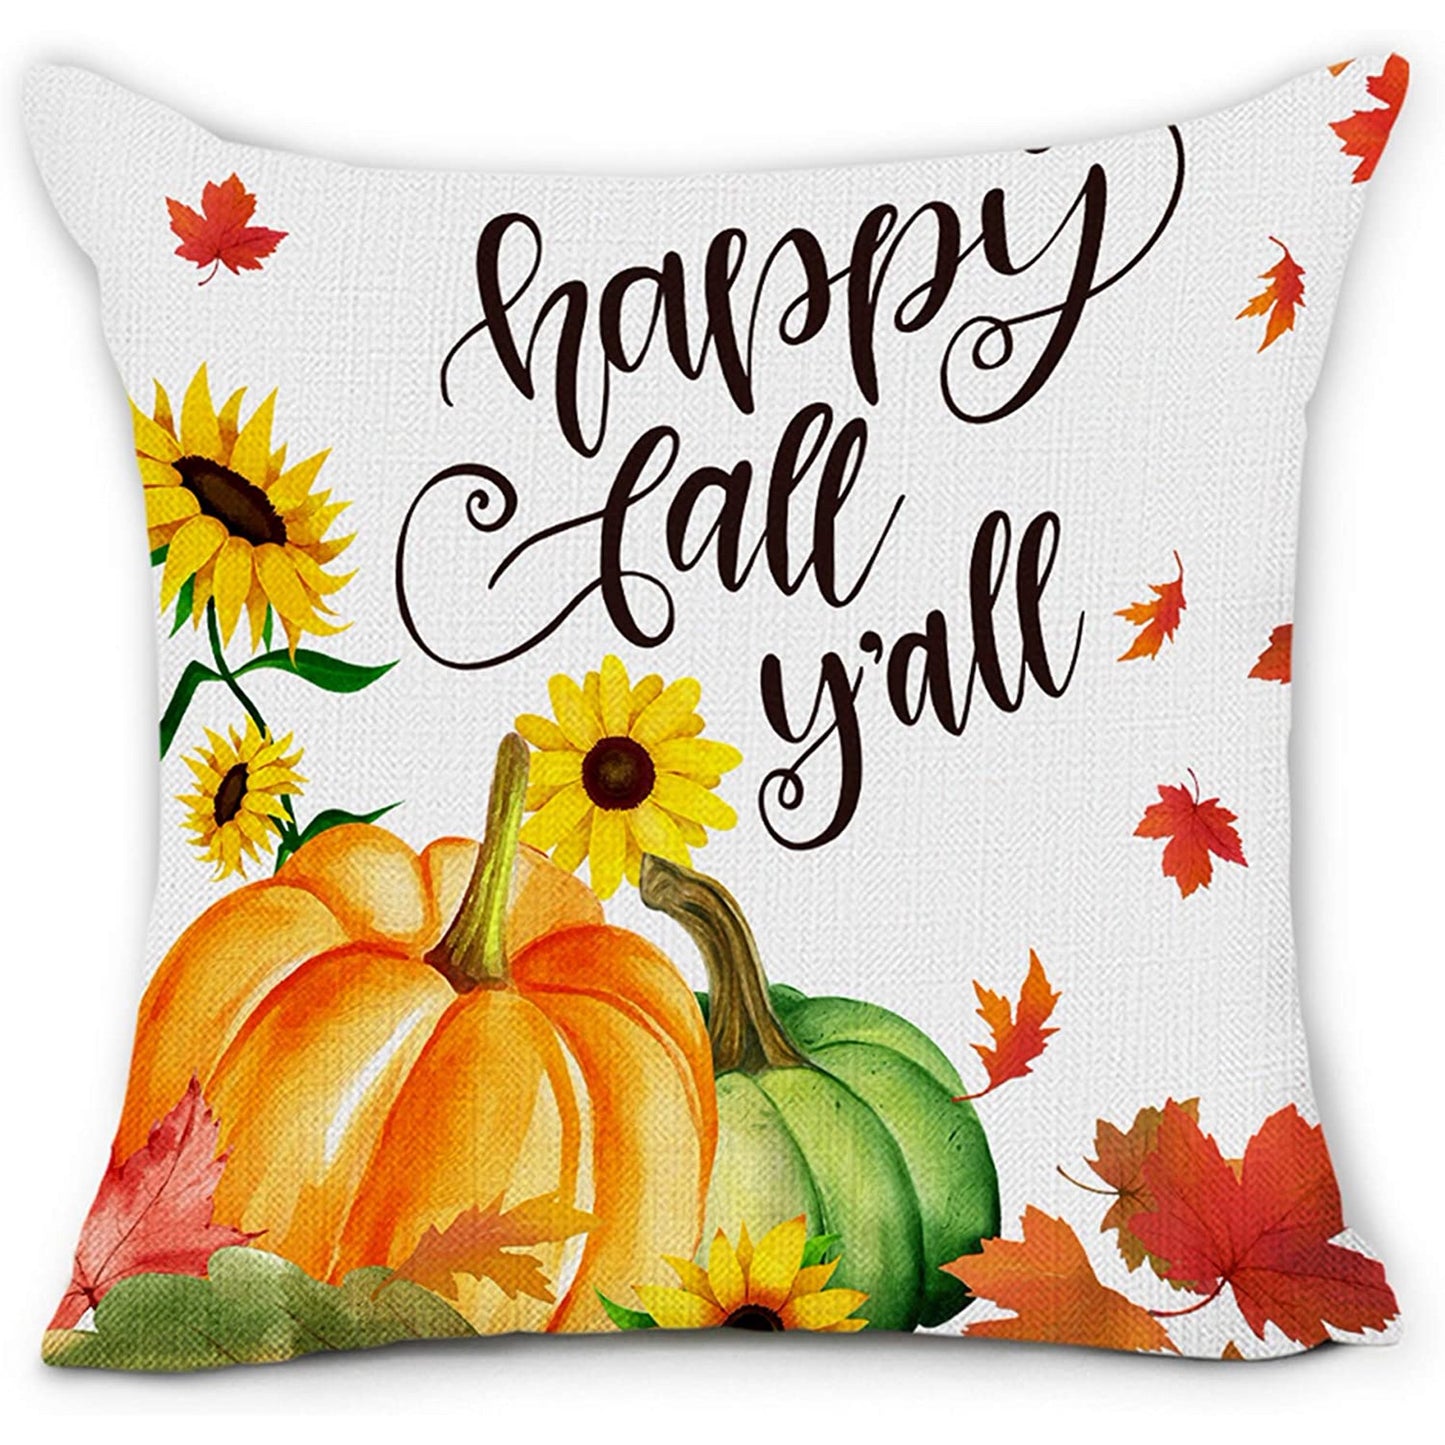 Fall-Focused Home Accents: DecorX Pillow Covers - Set of 4, Showcasing Vibrant Pumpkin & Sunflower Artistry